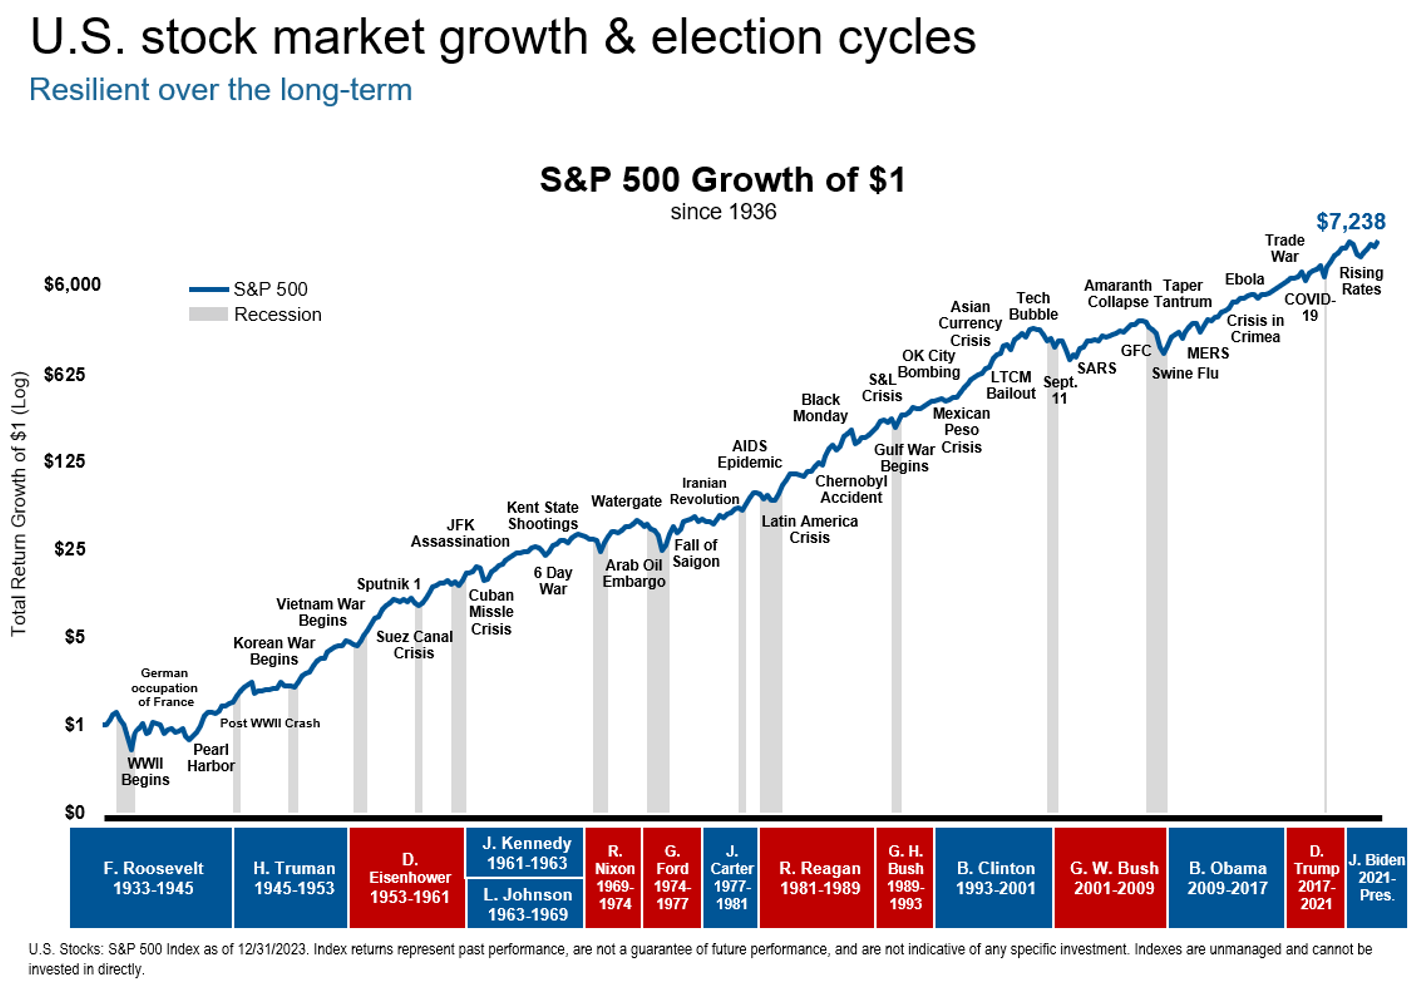 U.S. stock market growth and election cycles chart